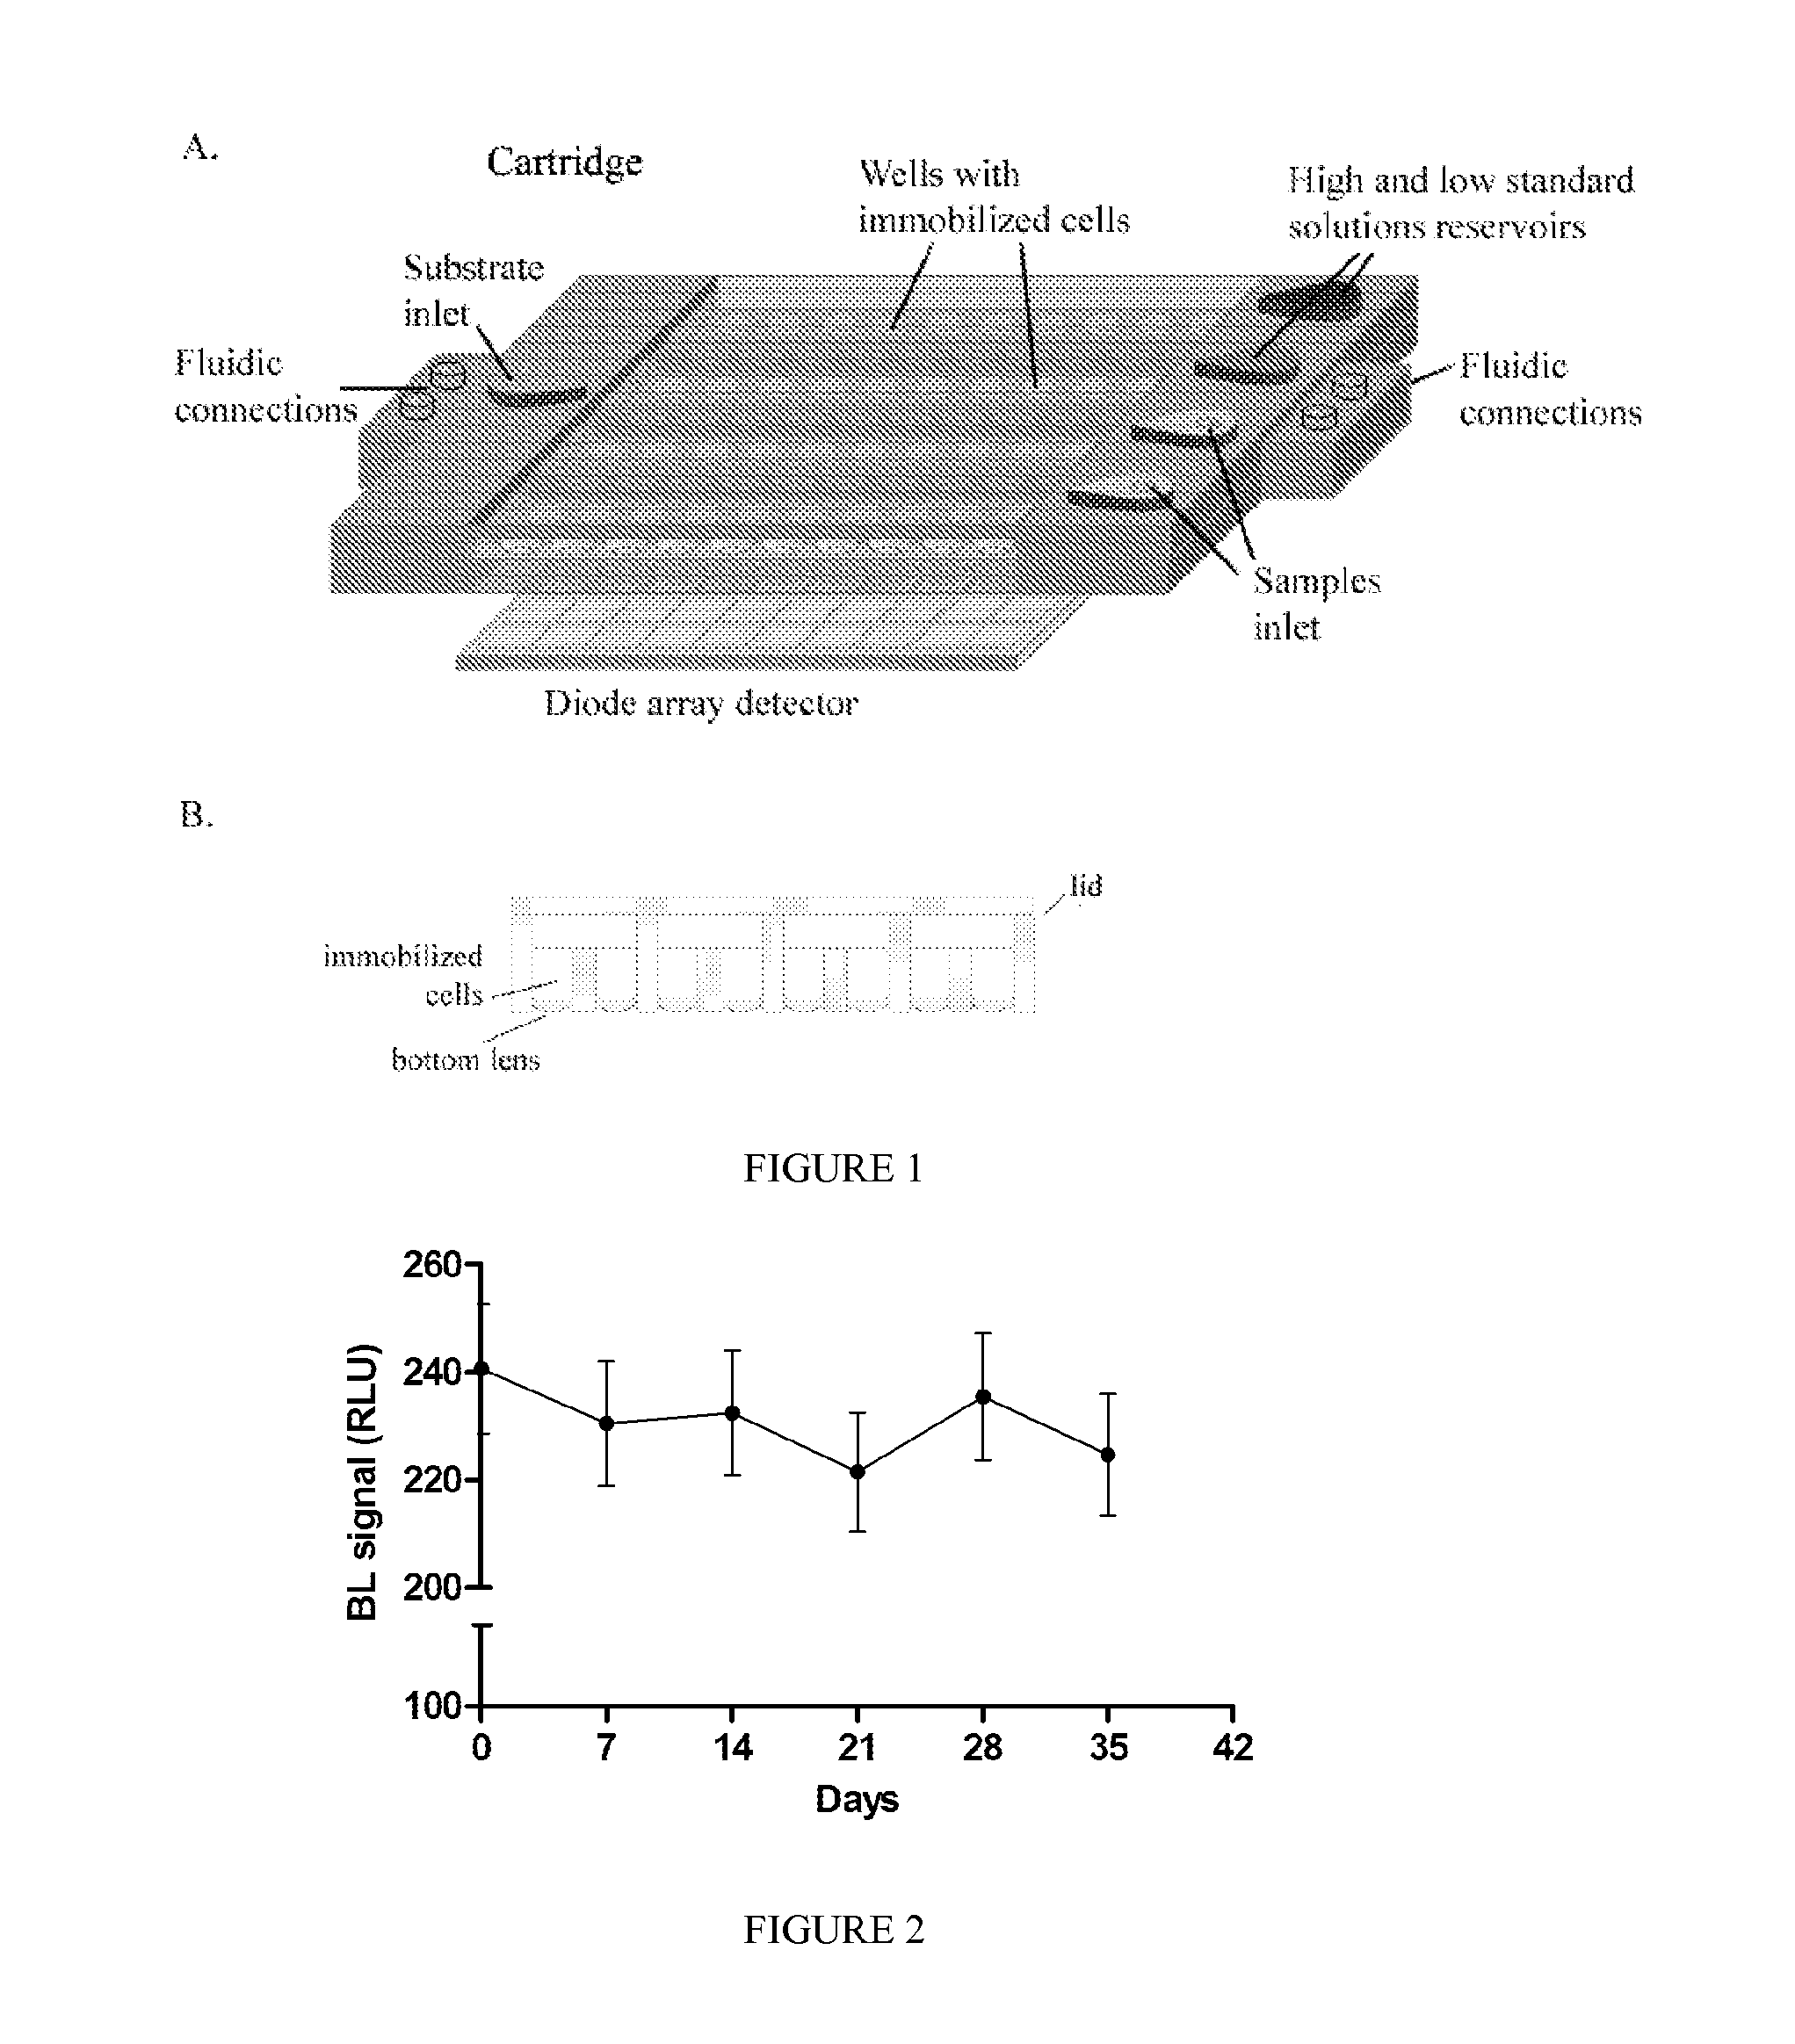 Portable device based on immobilized cells for the detection of analytes